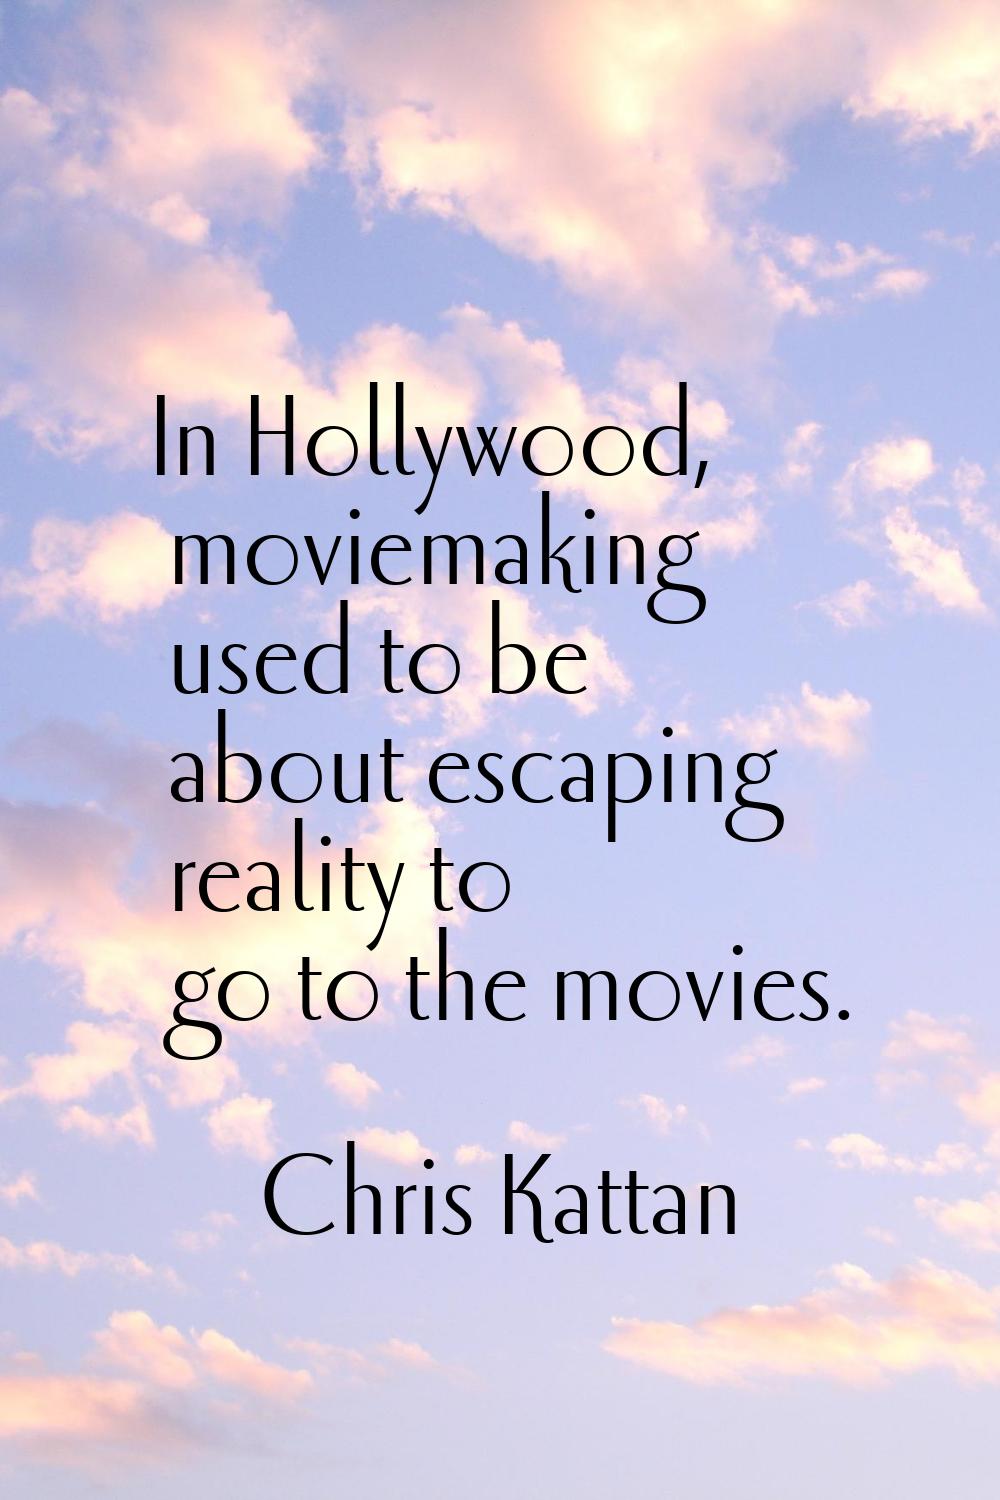 In Hollywood, moviemaking used to be about escaping reality to go to the movies.